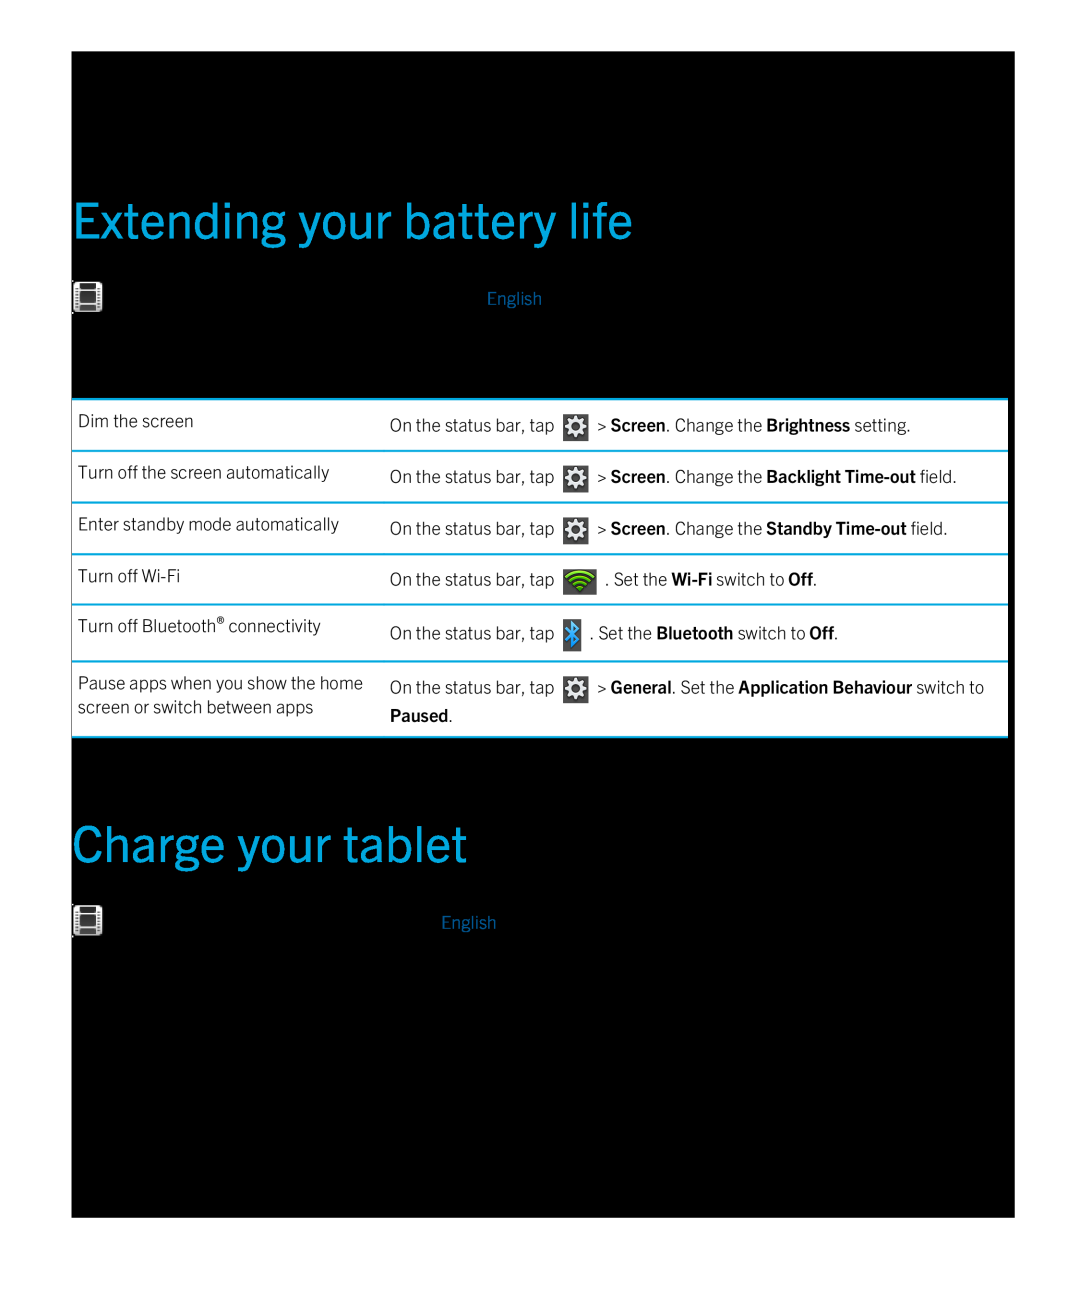 Blackberry 2.0.1 Extending your battery life, Charge your tablet, Screen. Change the Backlight Time-out field, Paused 